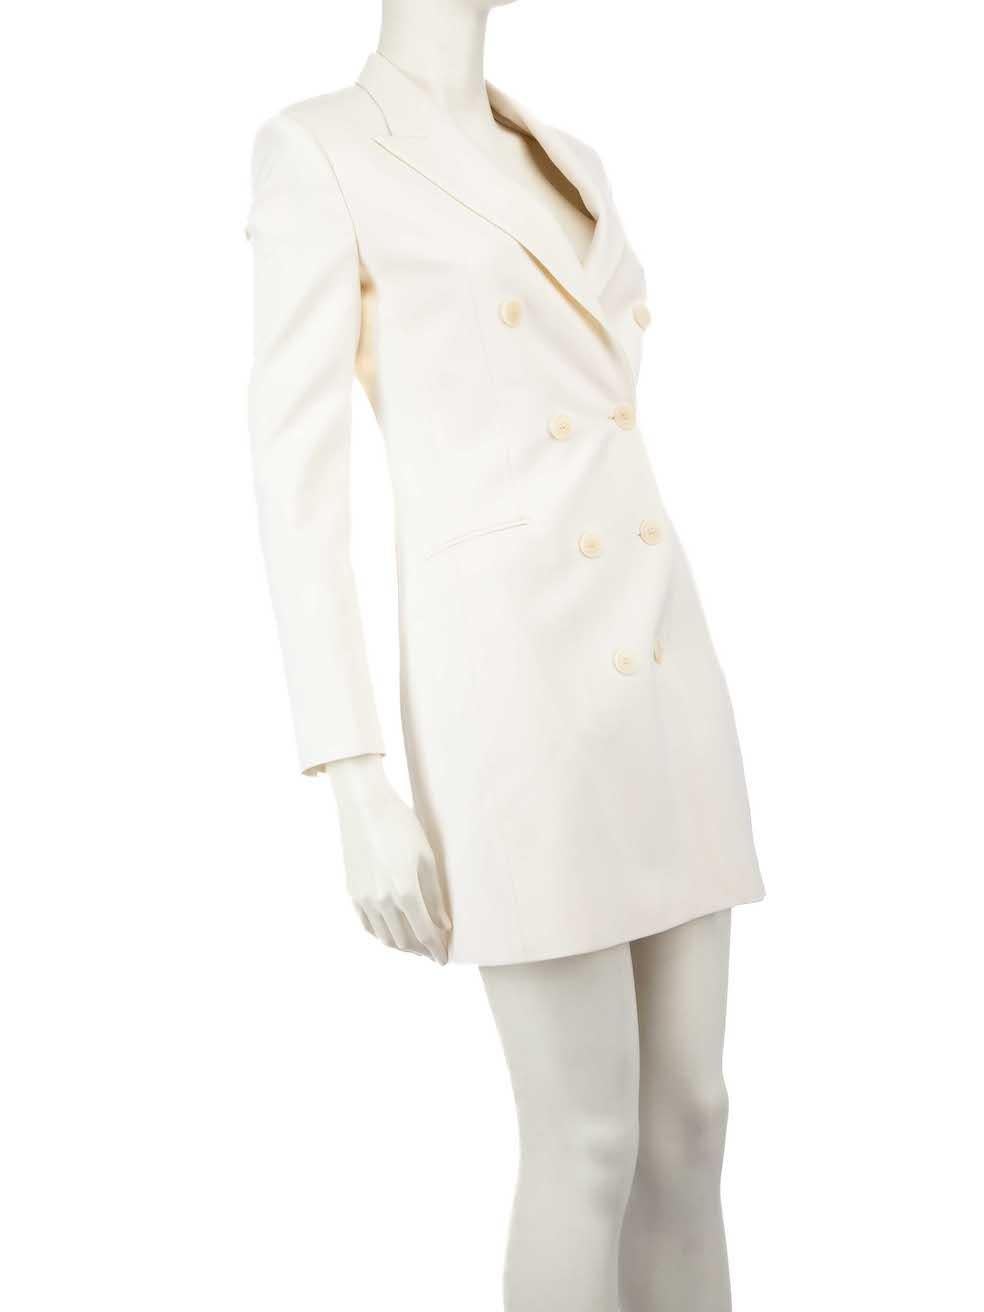 CONDITION is Never worn, with tags. No visible wear to the blazer is evident on this new Stella McCartney designer resale item.
 
 
 
 Details
 
 
 Ecru
 
 Wool
 
 Blazer
 
 Mid length
 
 Double breasted
 
 Button up fastening
 
 Shoulder pads
 
